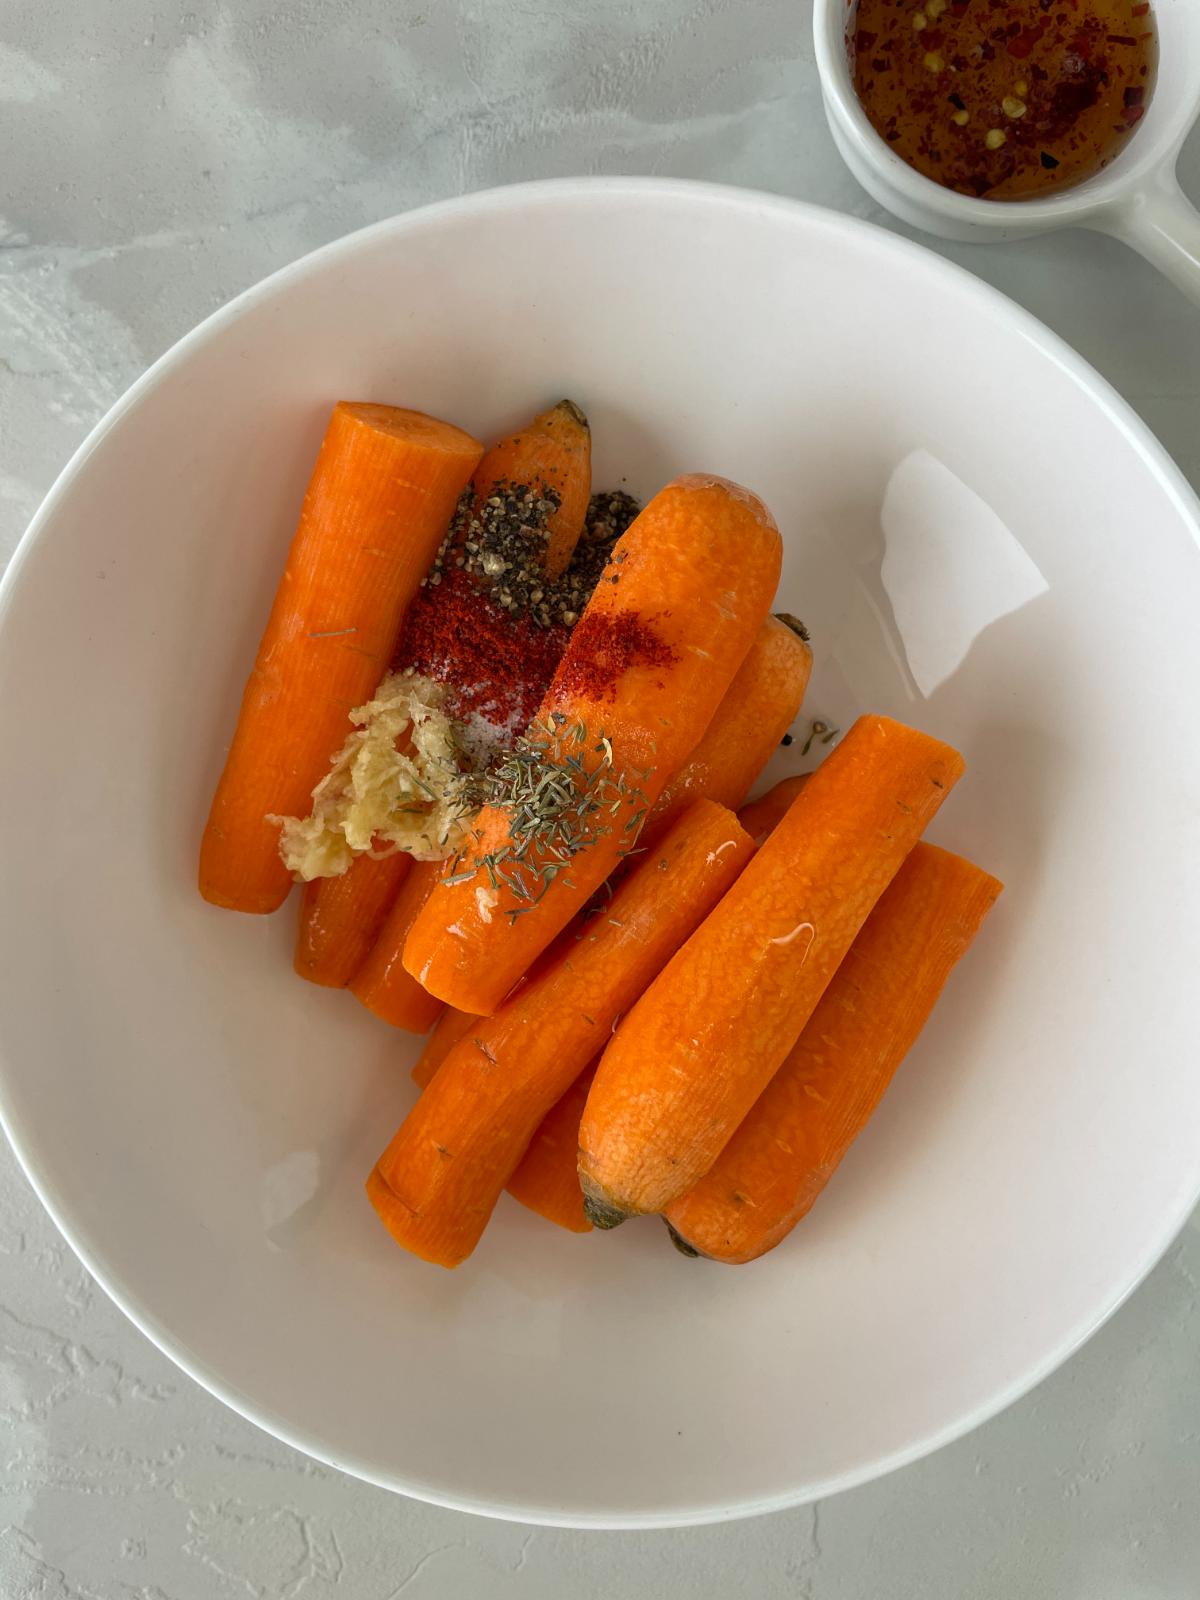 adding spices and seasonings to the carrots